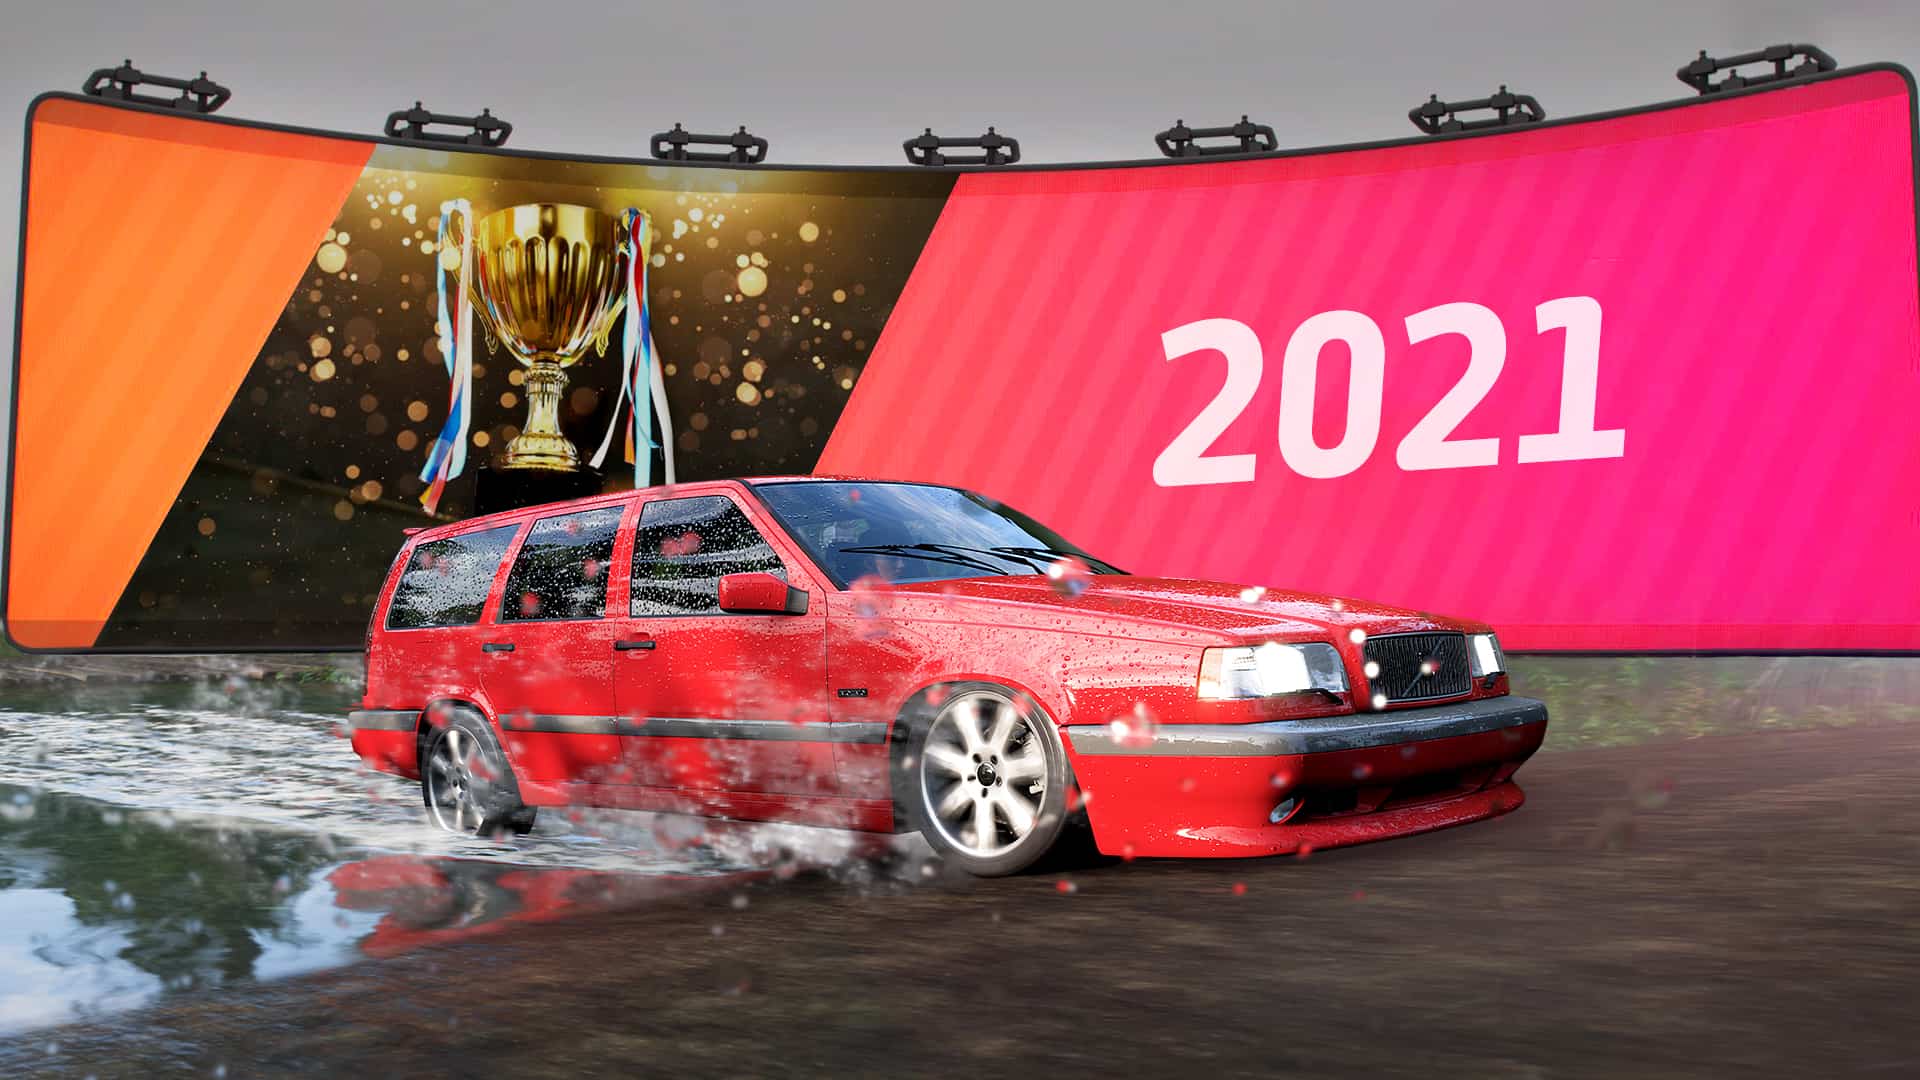 Forza Horizon 5 is your favourite racing game of 2021